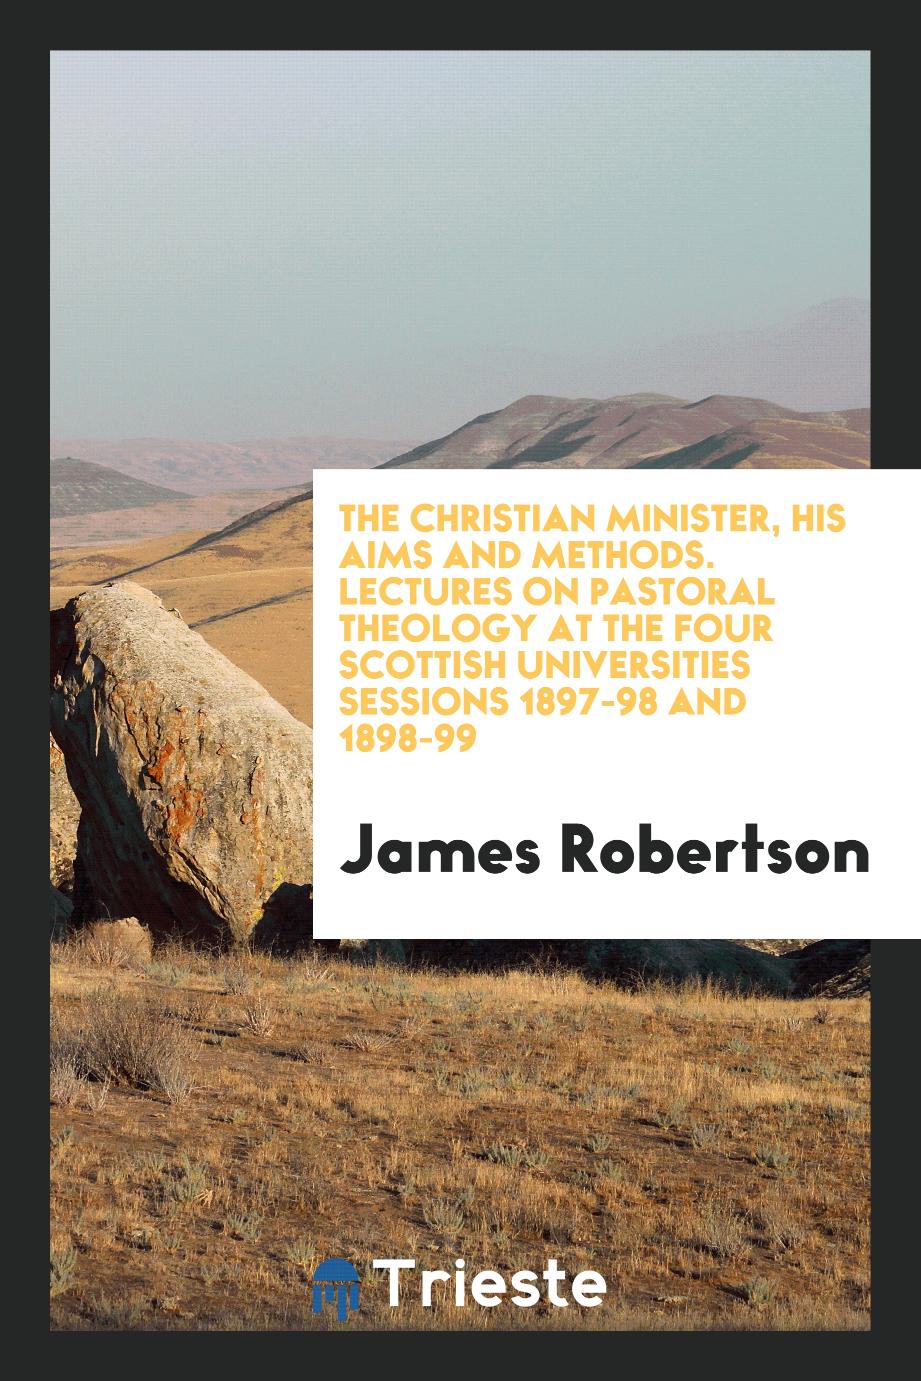 The Christian Minister, His Aims and Methods. Lectures on Pastoral Theology at the Four Scottish Universities Sessions 1897-98 and 1898-99